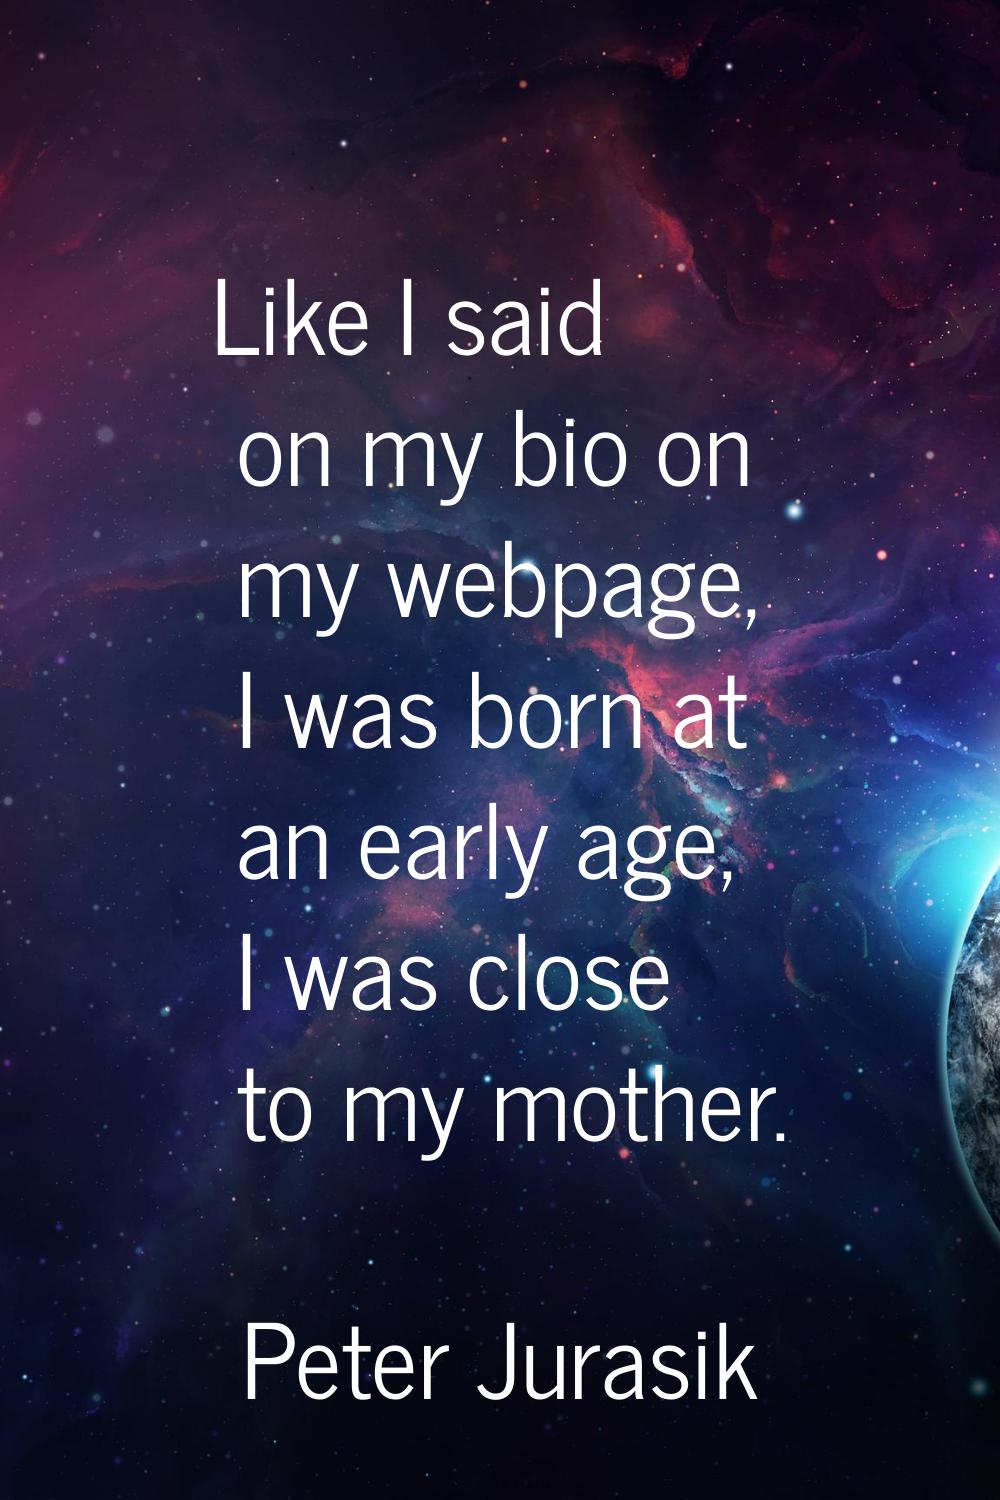 Like I said on my bio on my webpage, I was born at an early age, I was close to my mother.